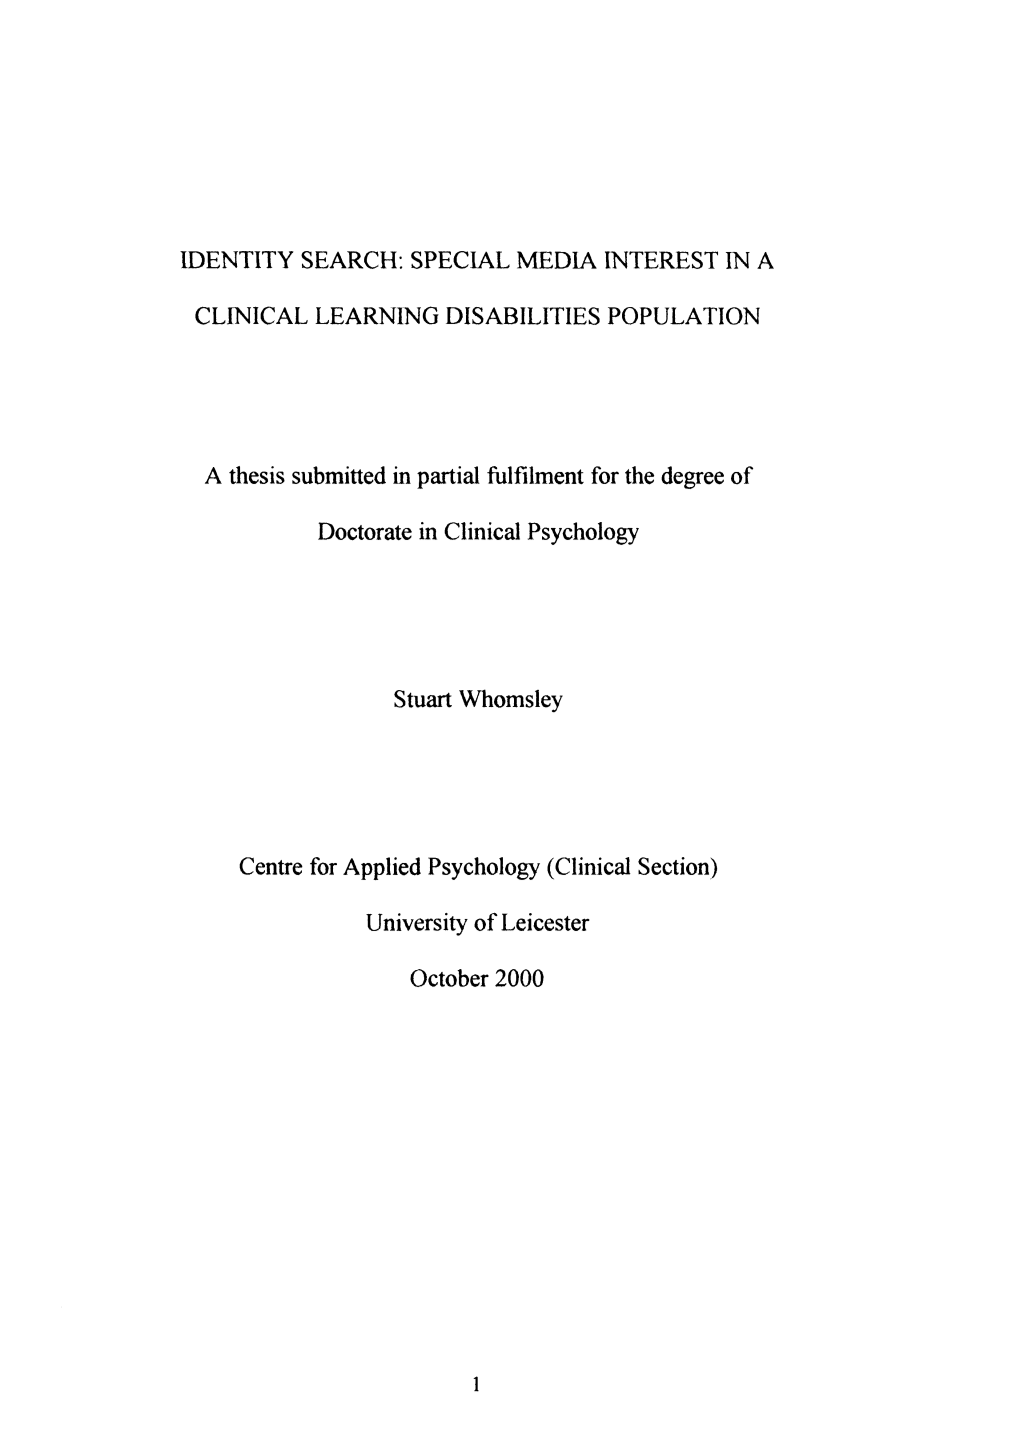 Identity Search: Special Media Interest in a Clinical